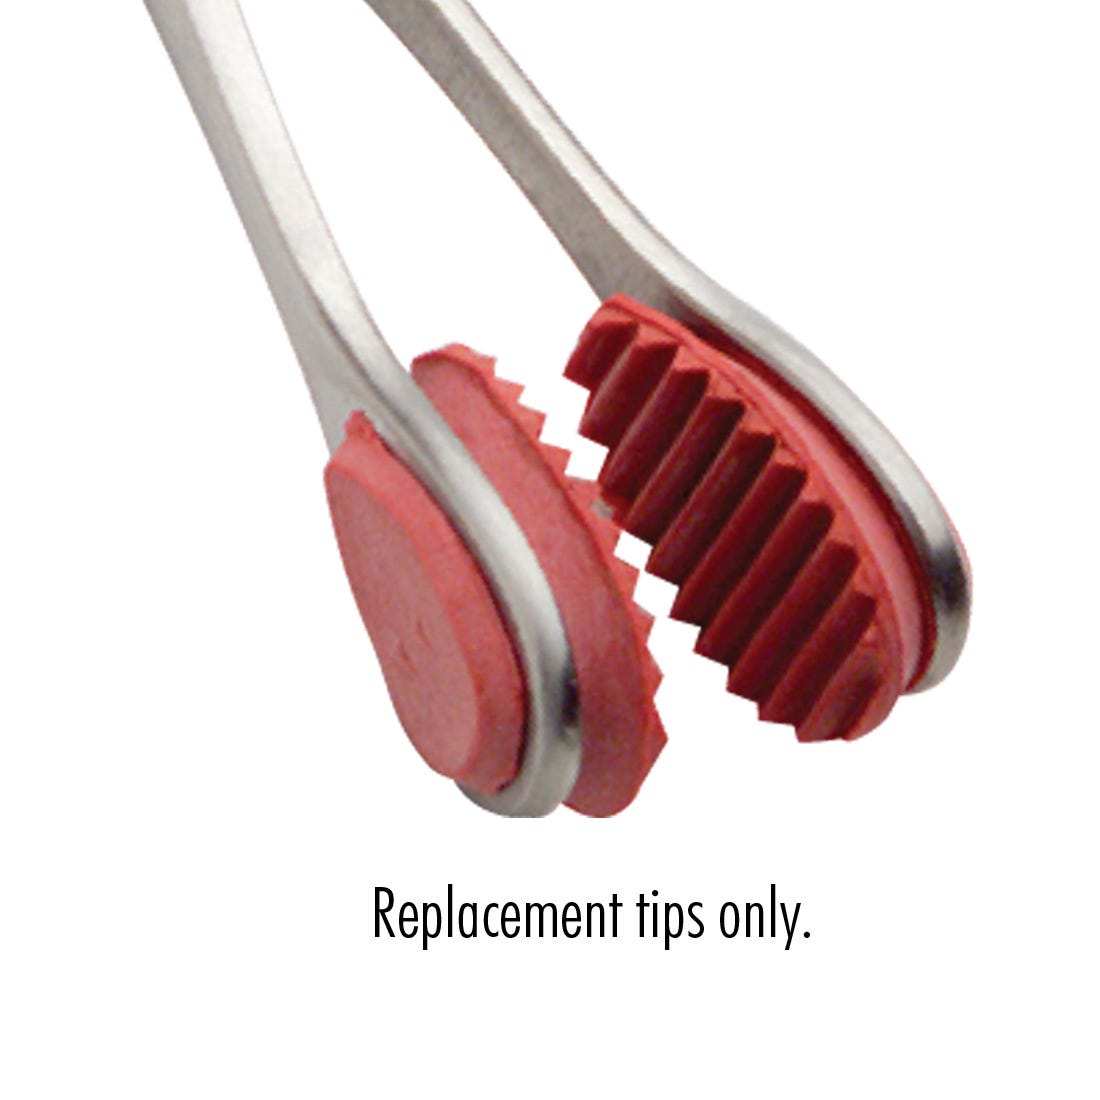 Replacement Tips for 01-001-51 Young Tongue Seizing Forceps, Latex-Free